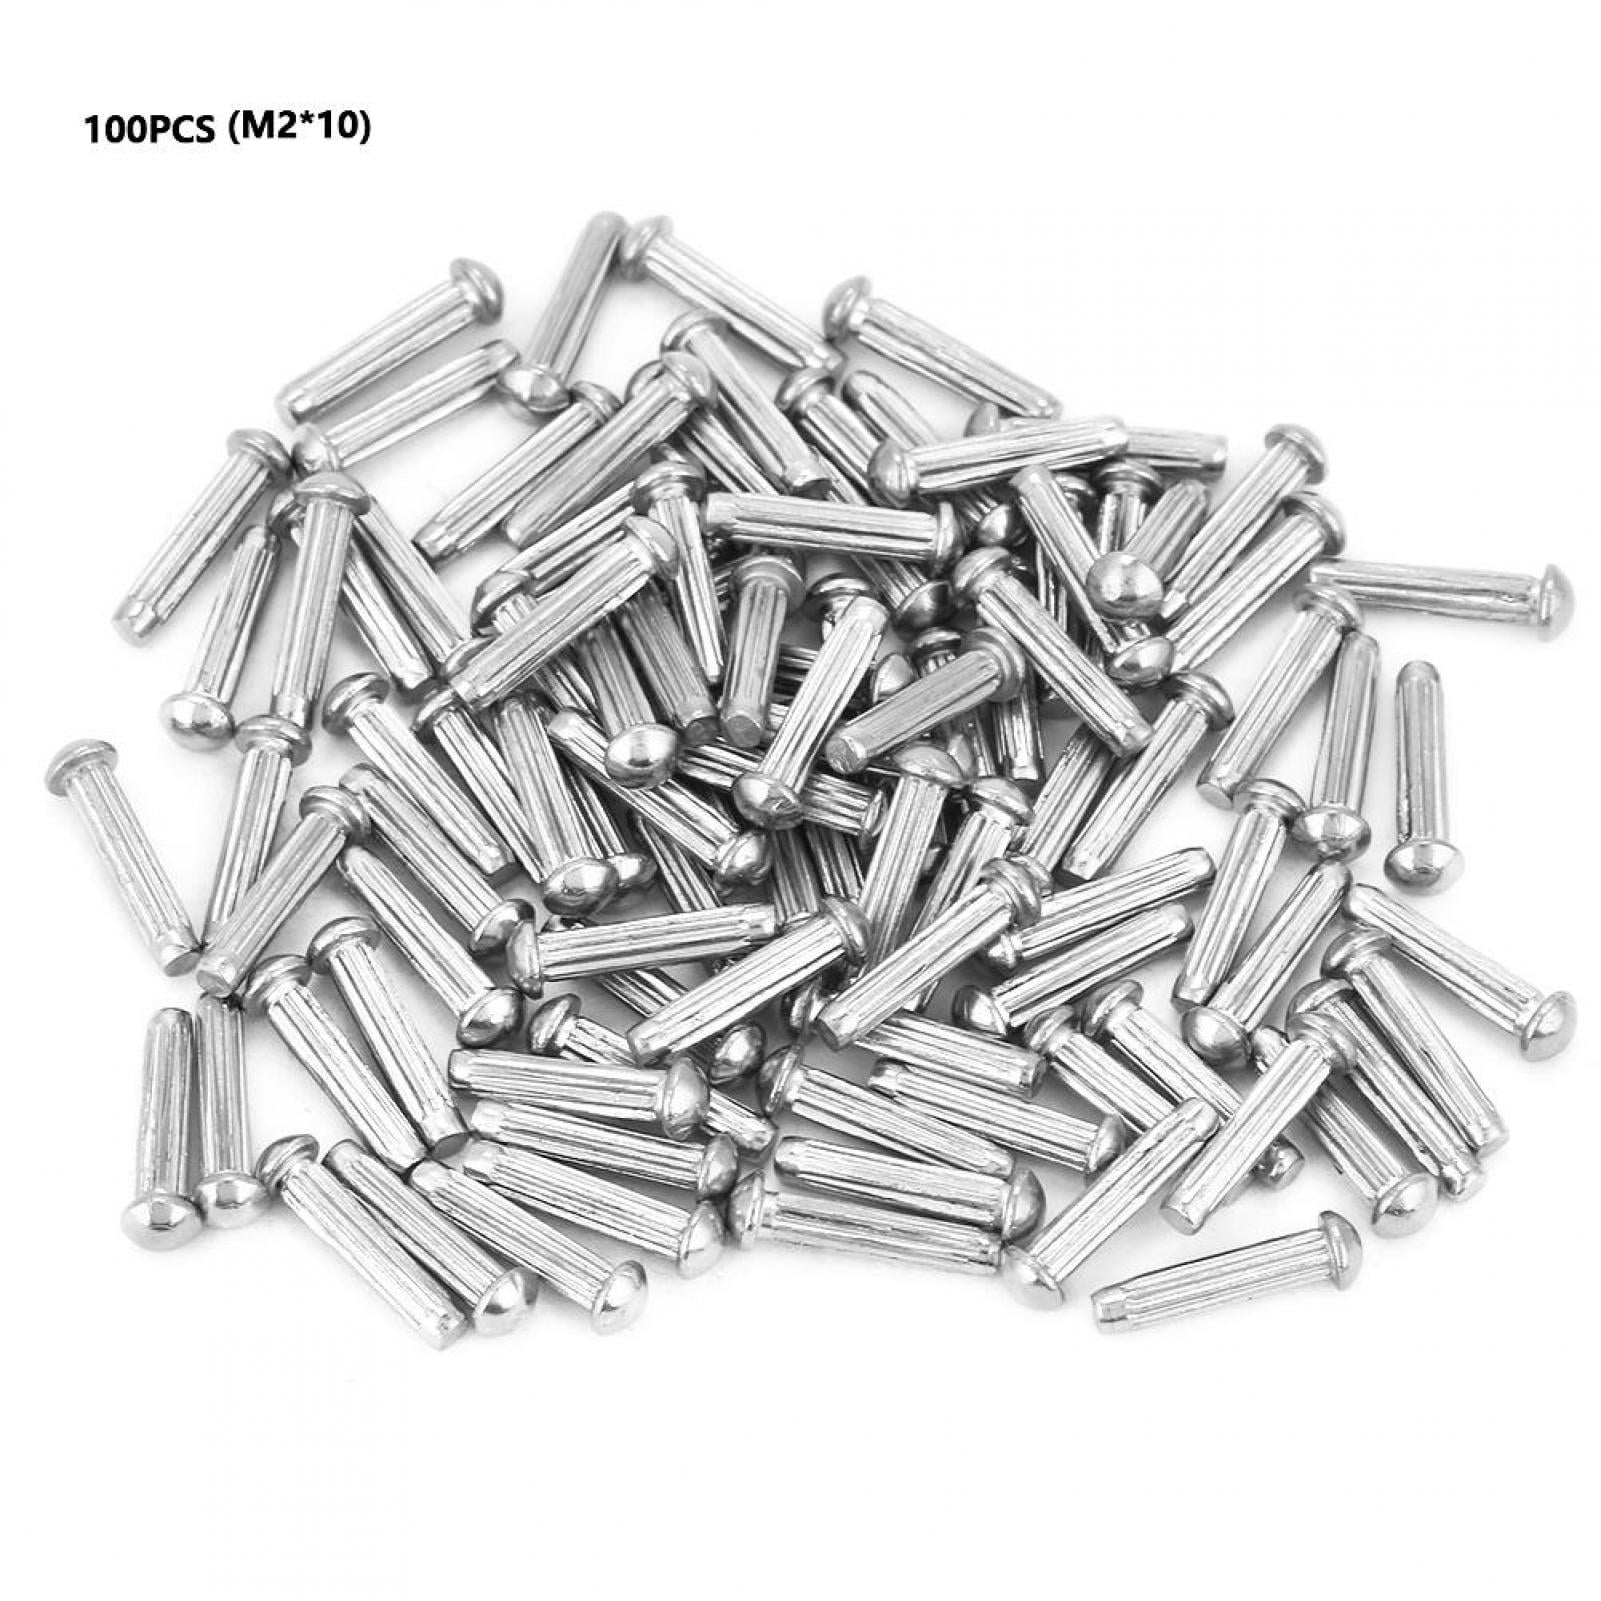 100pc/set M4*12 Stainless Steel Round Head Knurled Shank Rivets Hardware Tool 